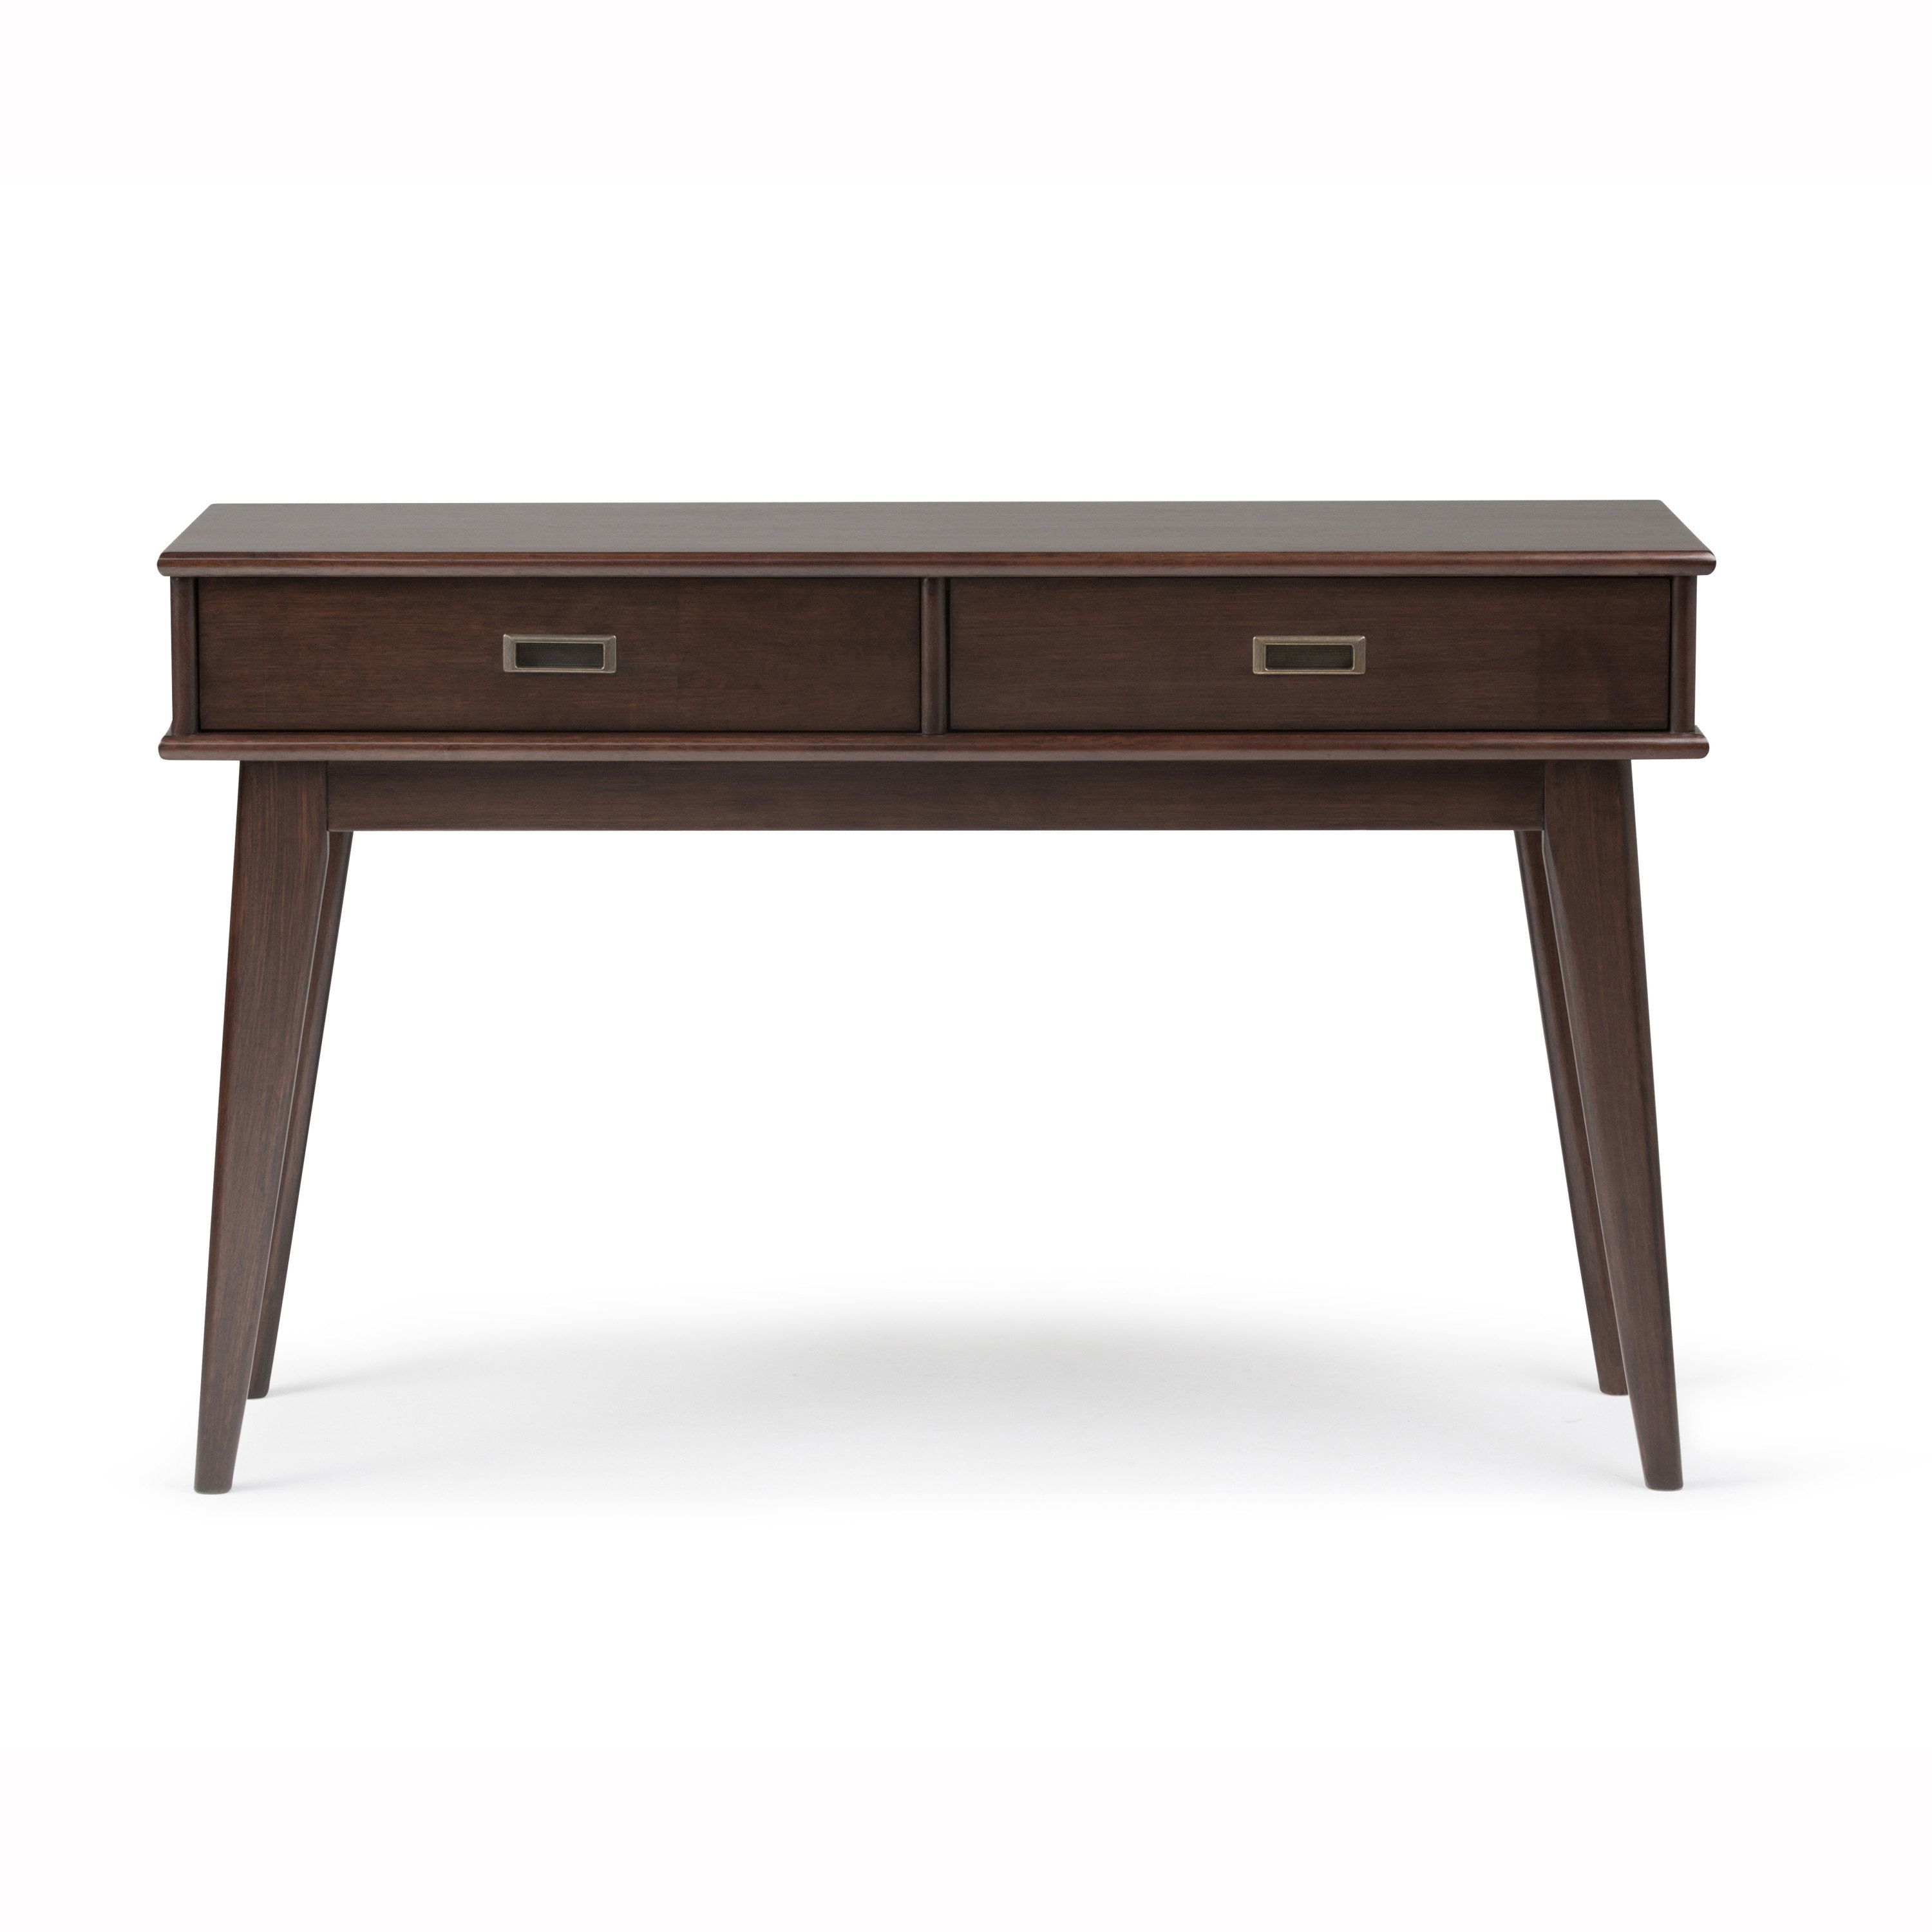 Simpli Home Draper Console Table & Reviews | Wayfair Intended For Draper 62 Inch Tv Stands (View 18 of 30)